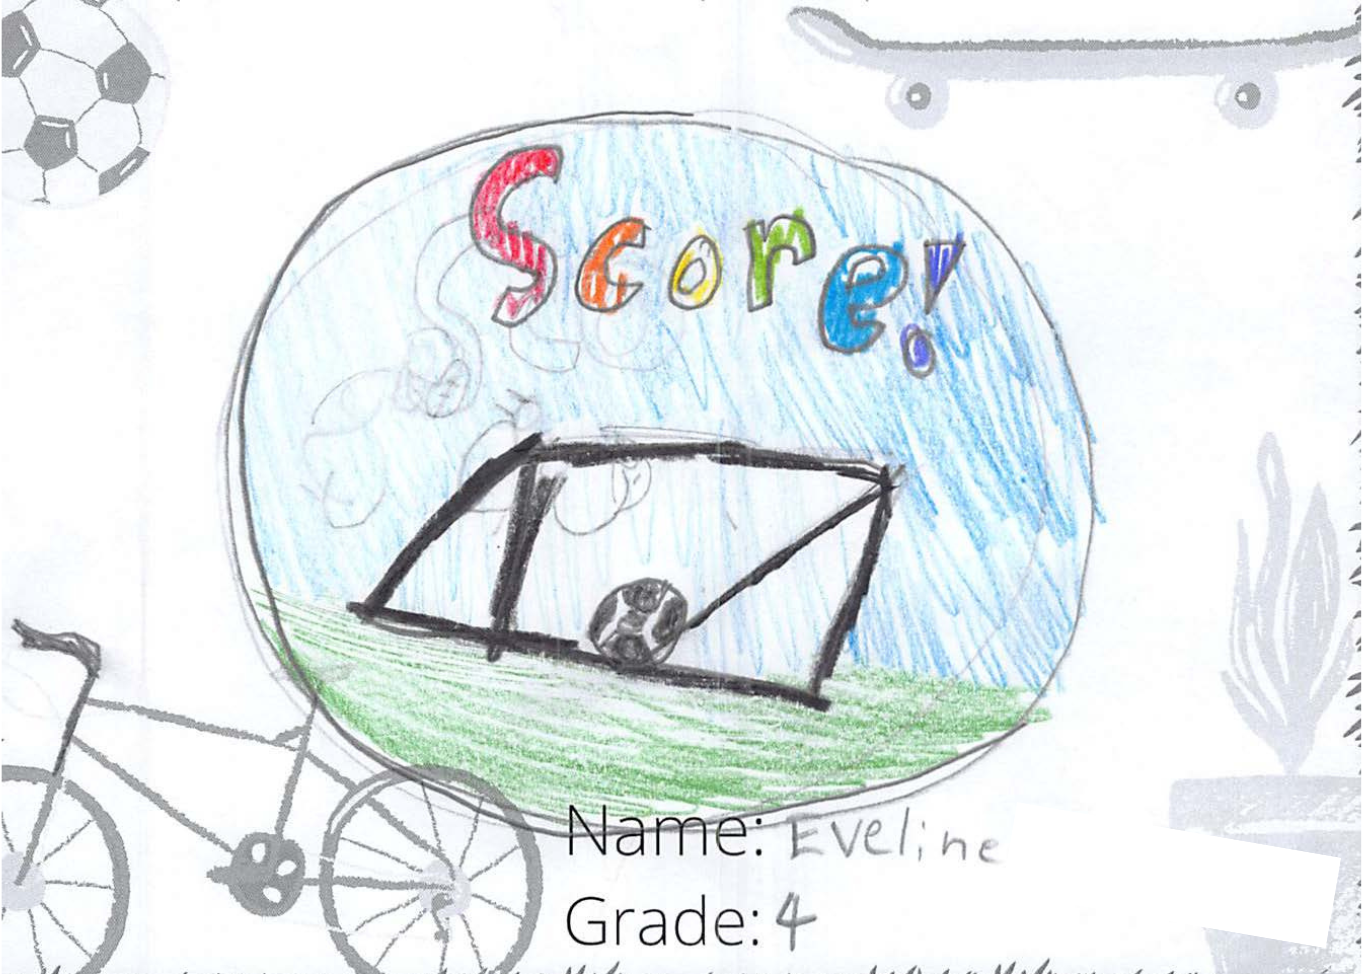 Pencil crayon drawing for the SCORE! logo contest. The drawing includes a soccer ball in a net.